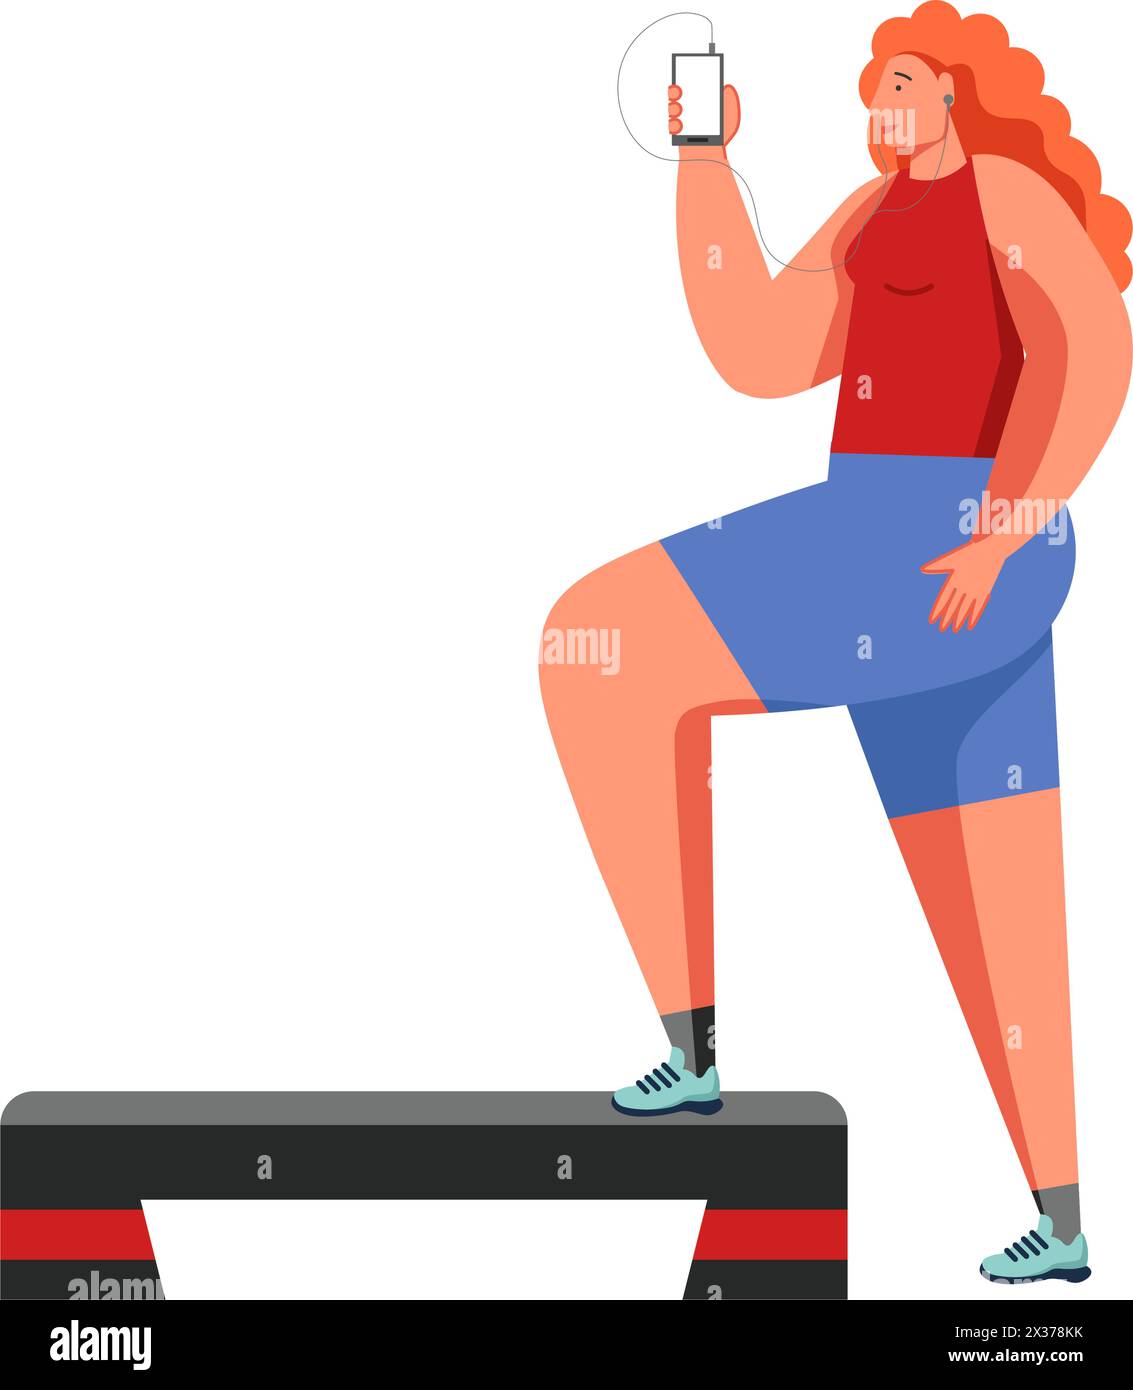 Fitness and gym people vector flat isolated illustration Stock Vector